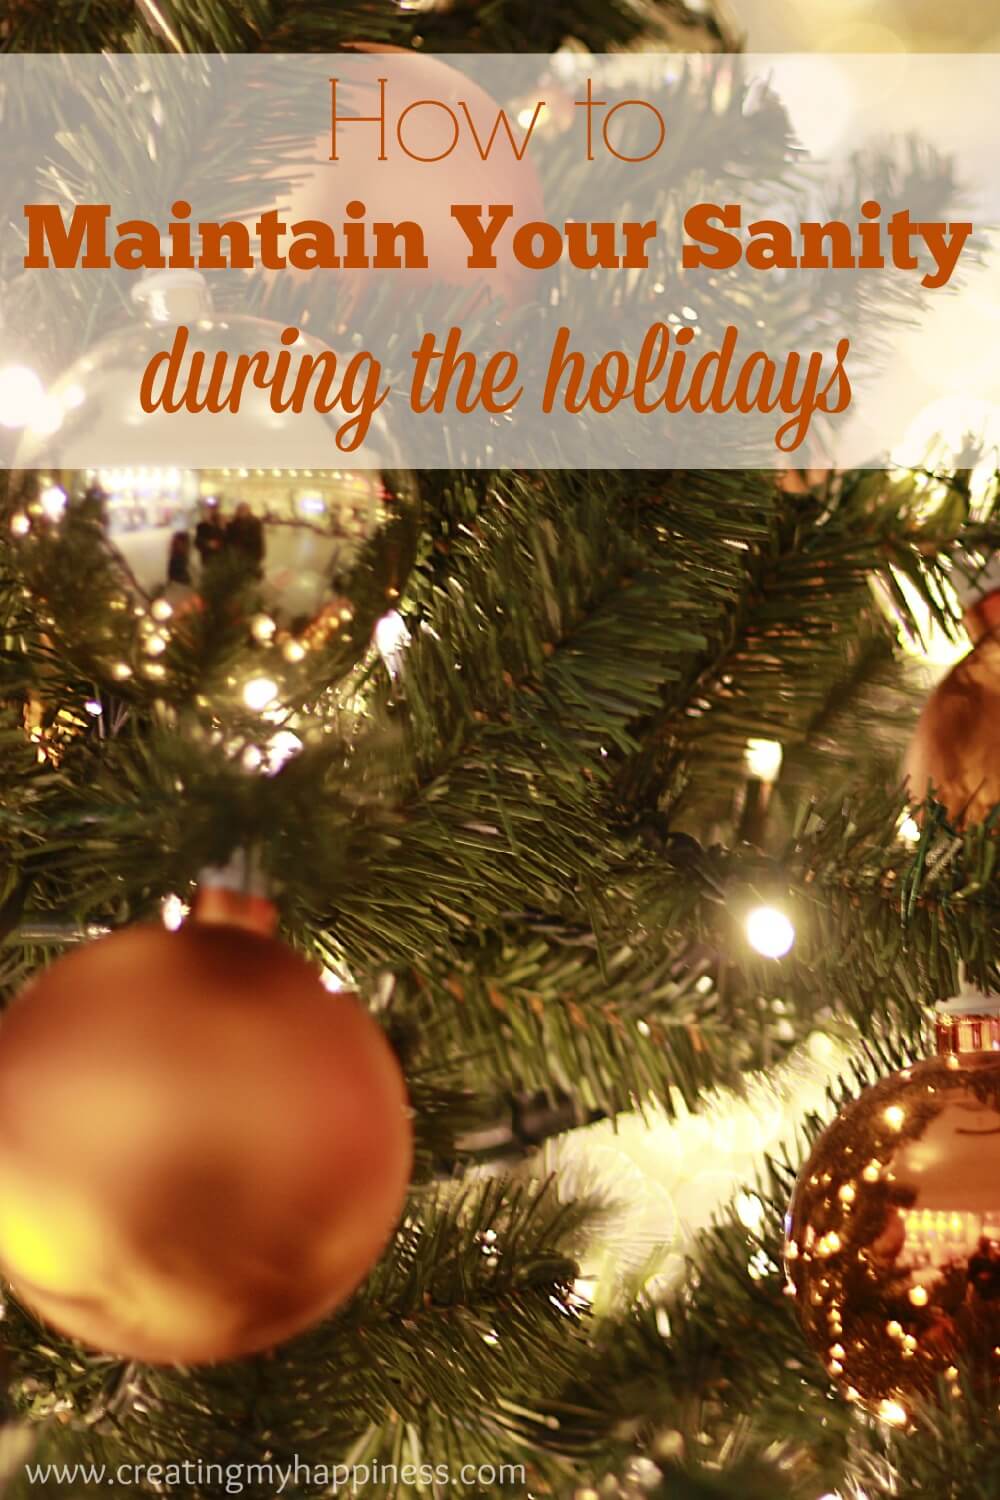 Back in my day, the holidays began after Halloween. Now-a-days things are very different. Here are some great tips for staying sane during the busy holiday season.